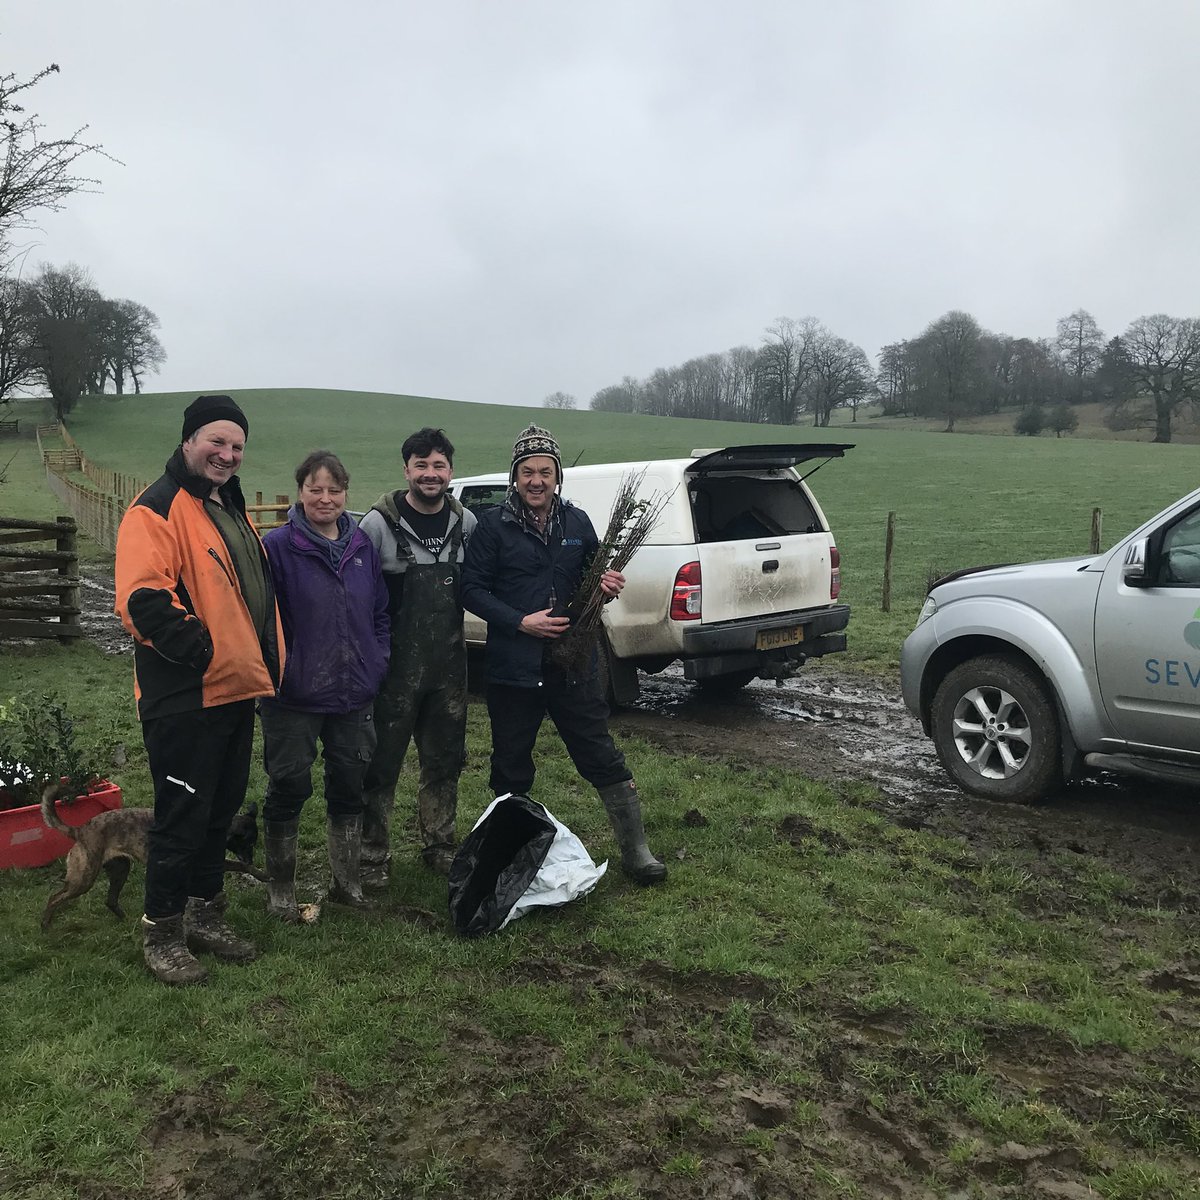 Guilsfield farm Tirnewydd is to have a new hedge planted on its edges. The young trees will shelter stock and wildlife alike. Their roots will take the rainwater down into the soil slowing the rainwater’s overland flow @severnrivers @EnvAgencyMids #hedgesandedges #slowtheflow